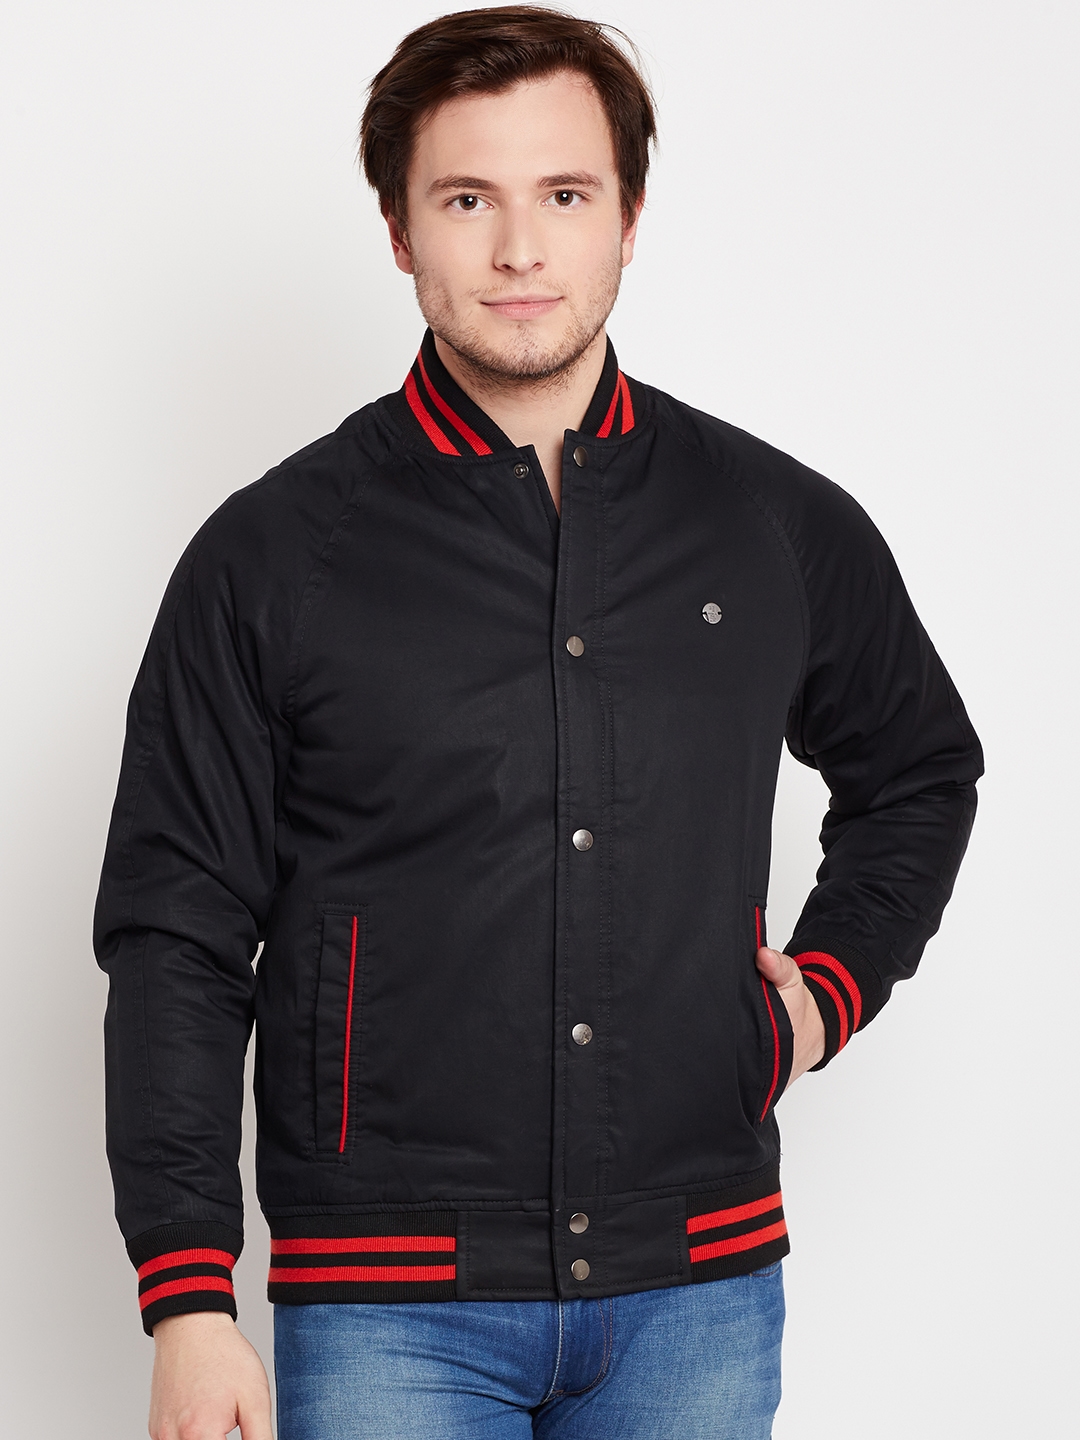 Peter England Bomber Jackets for Men sale - discounted price | FASHIOLA.in-gemektower.com.vn